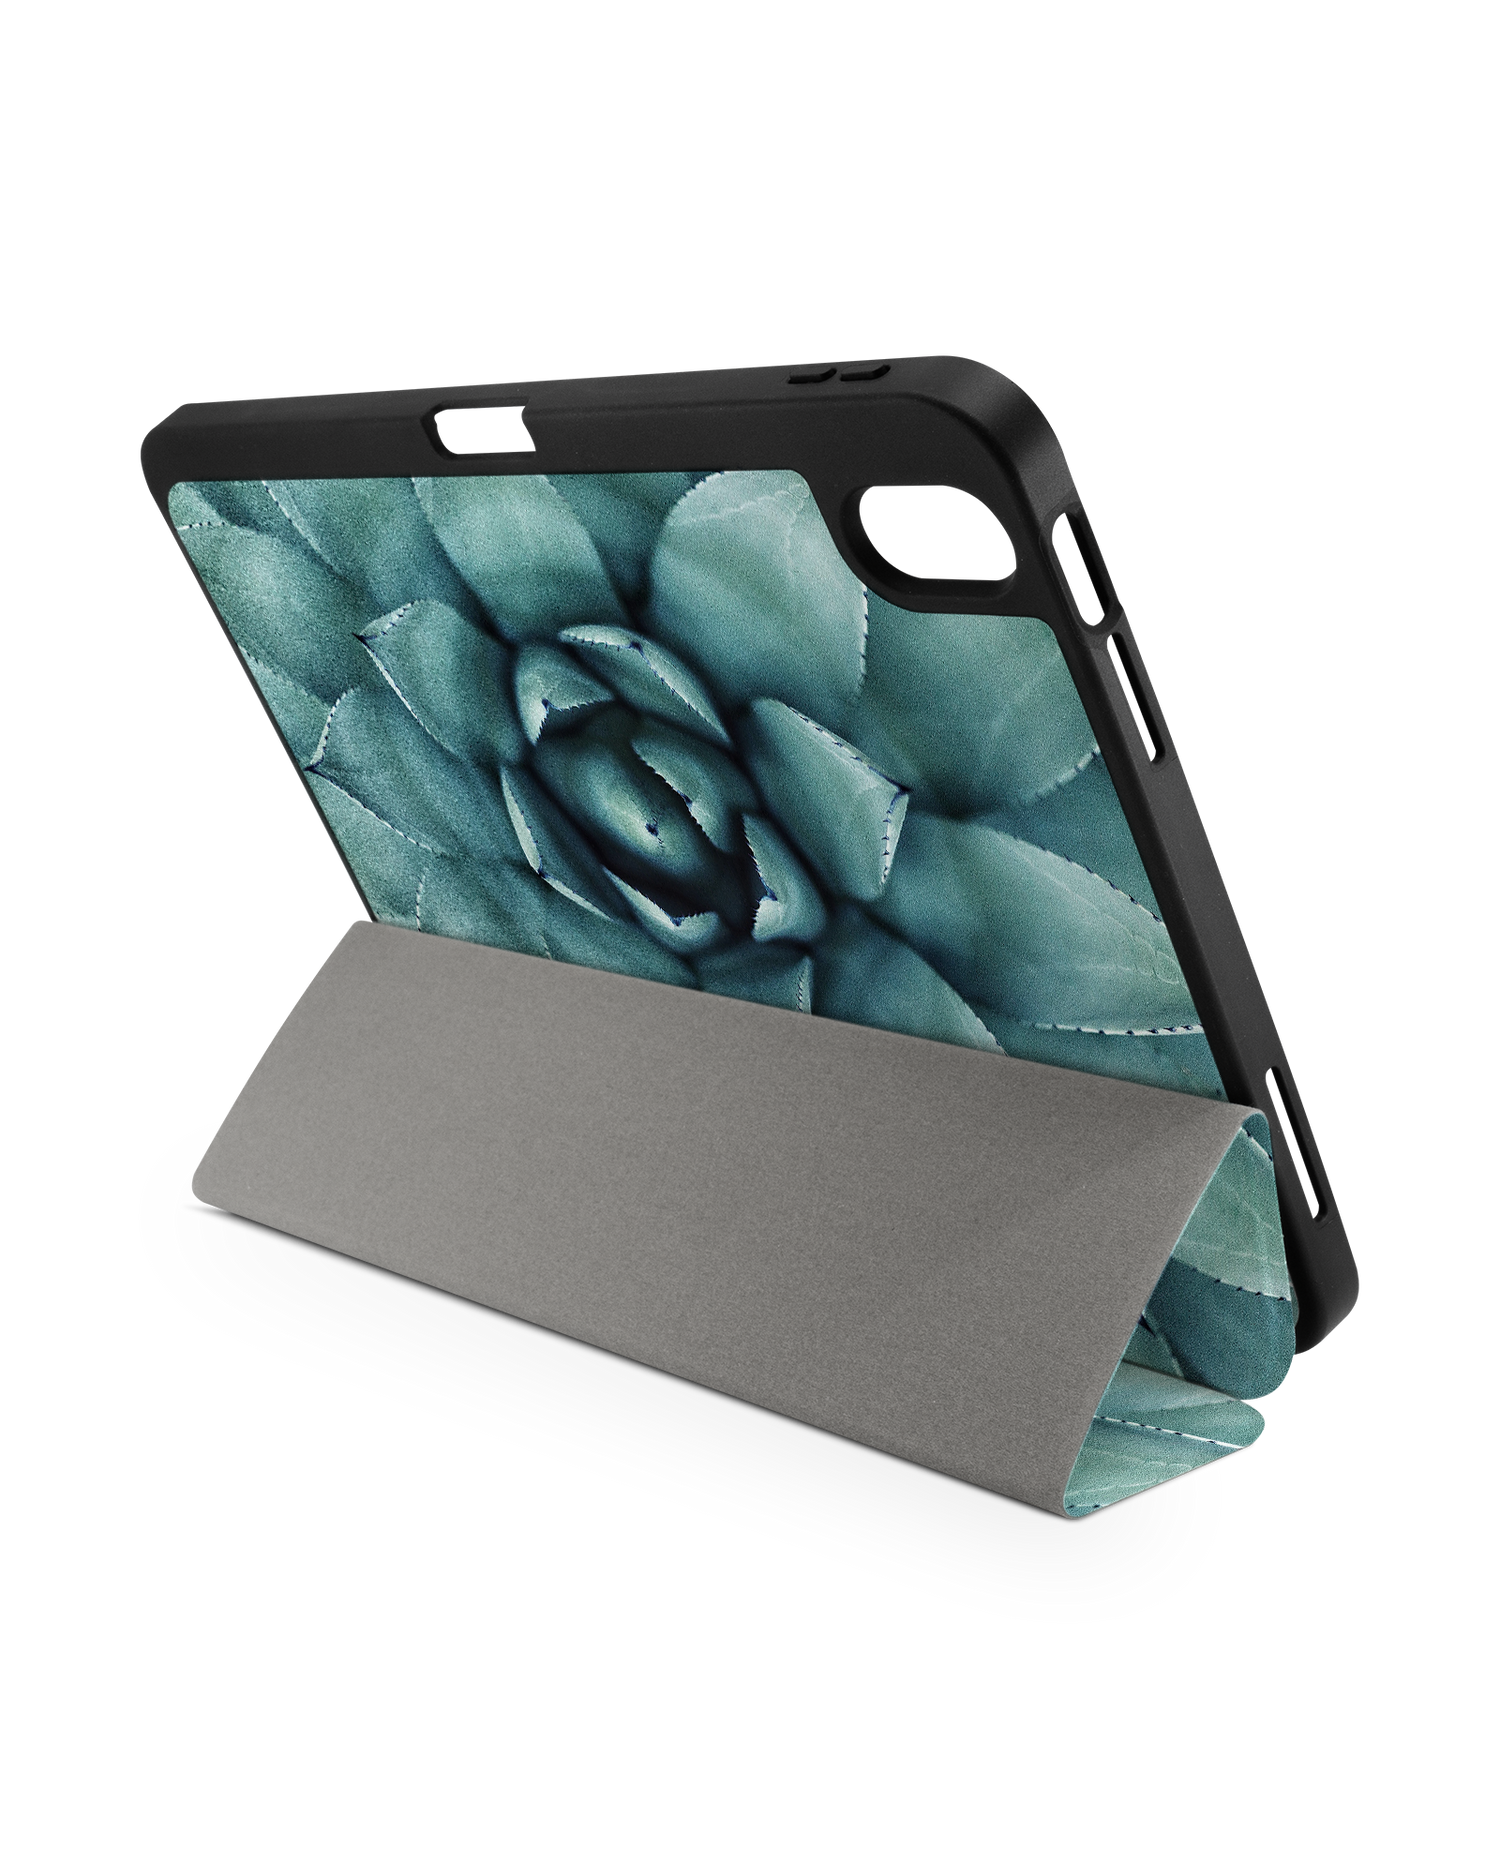 Beautiful Succulent iPad Case with Pencil Holder for Apple iPad (10th Generation): Set up in landscape format (back view)